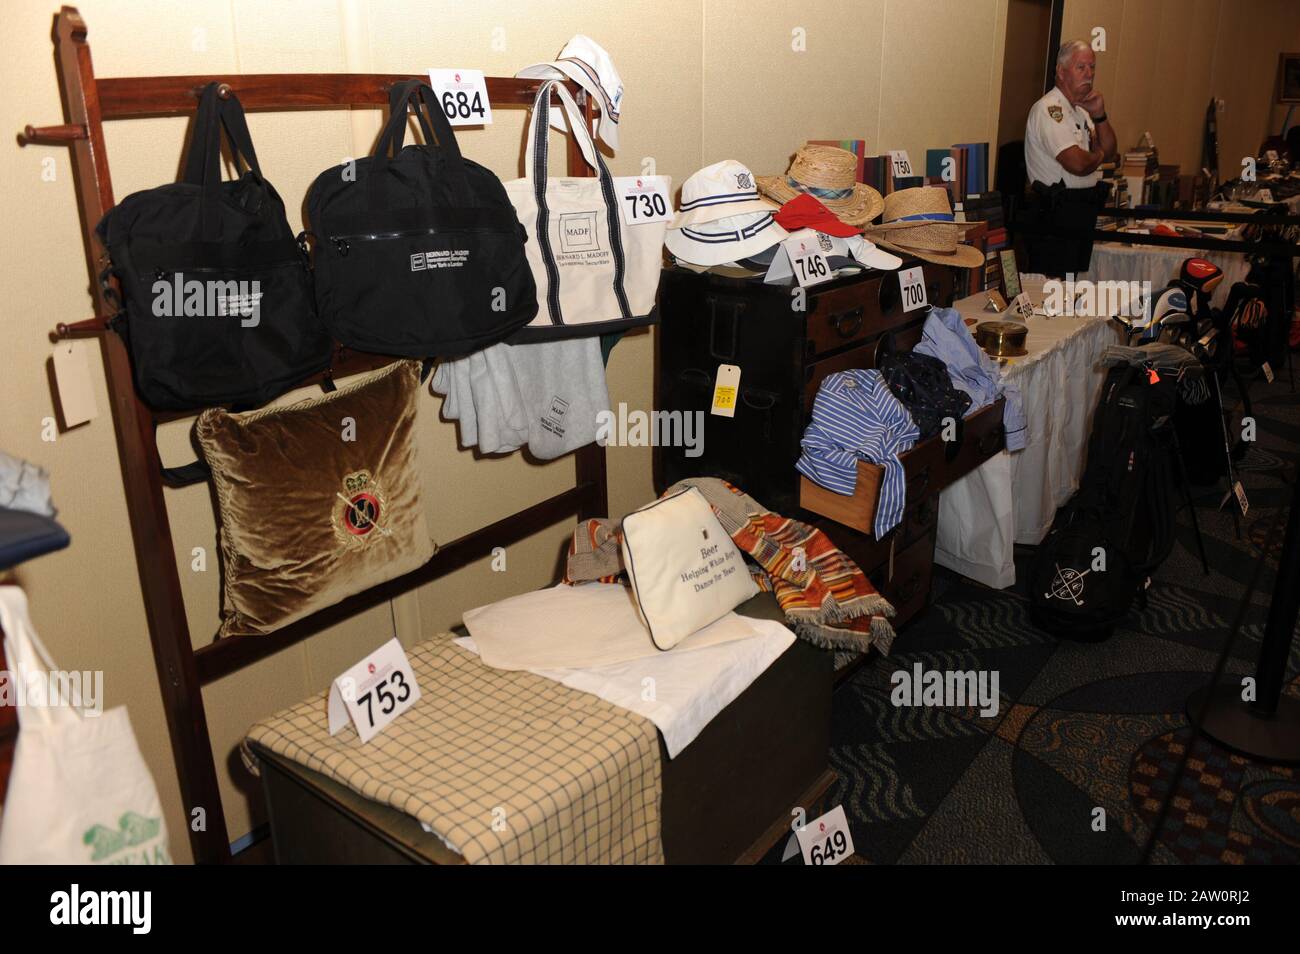 MIAMI BEACH, FL - JUNE 02: U.S. Marshals auction of more than 400 articles of jewelry, furniture, antiques and other personal property once belonging to Bernie and Ruth Madoff at the Miami Beach Convention Center on June 2, 2011 in Miami Beach, Florida People: Bernie Madoff Credit: Storms Media Group/Alamy Live News Stock Photo